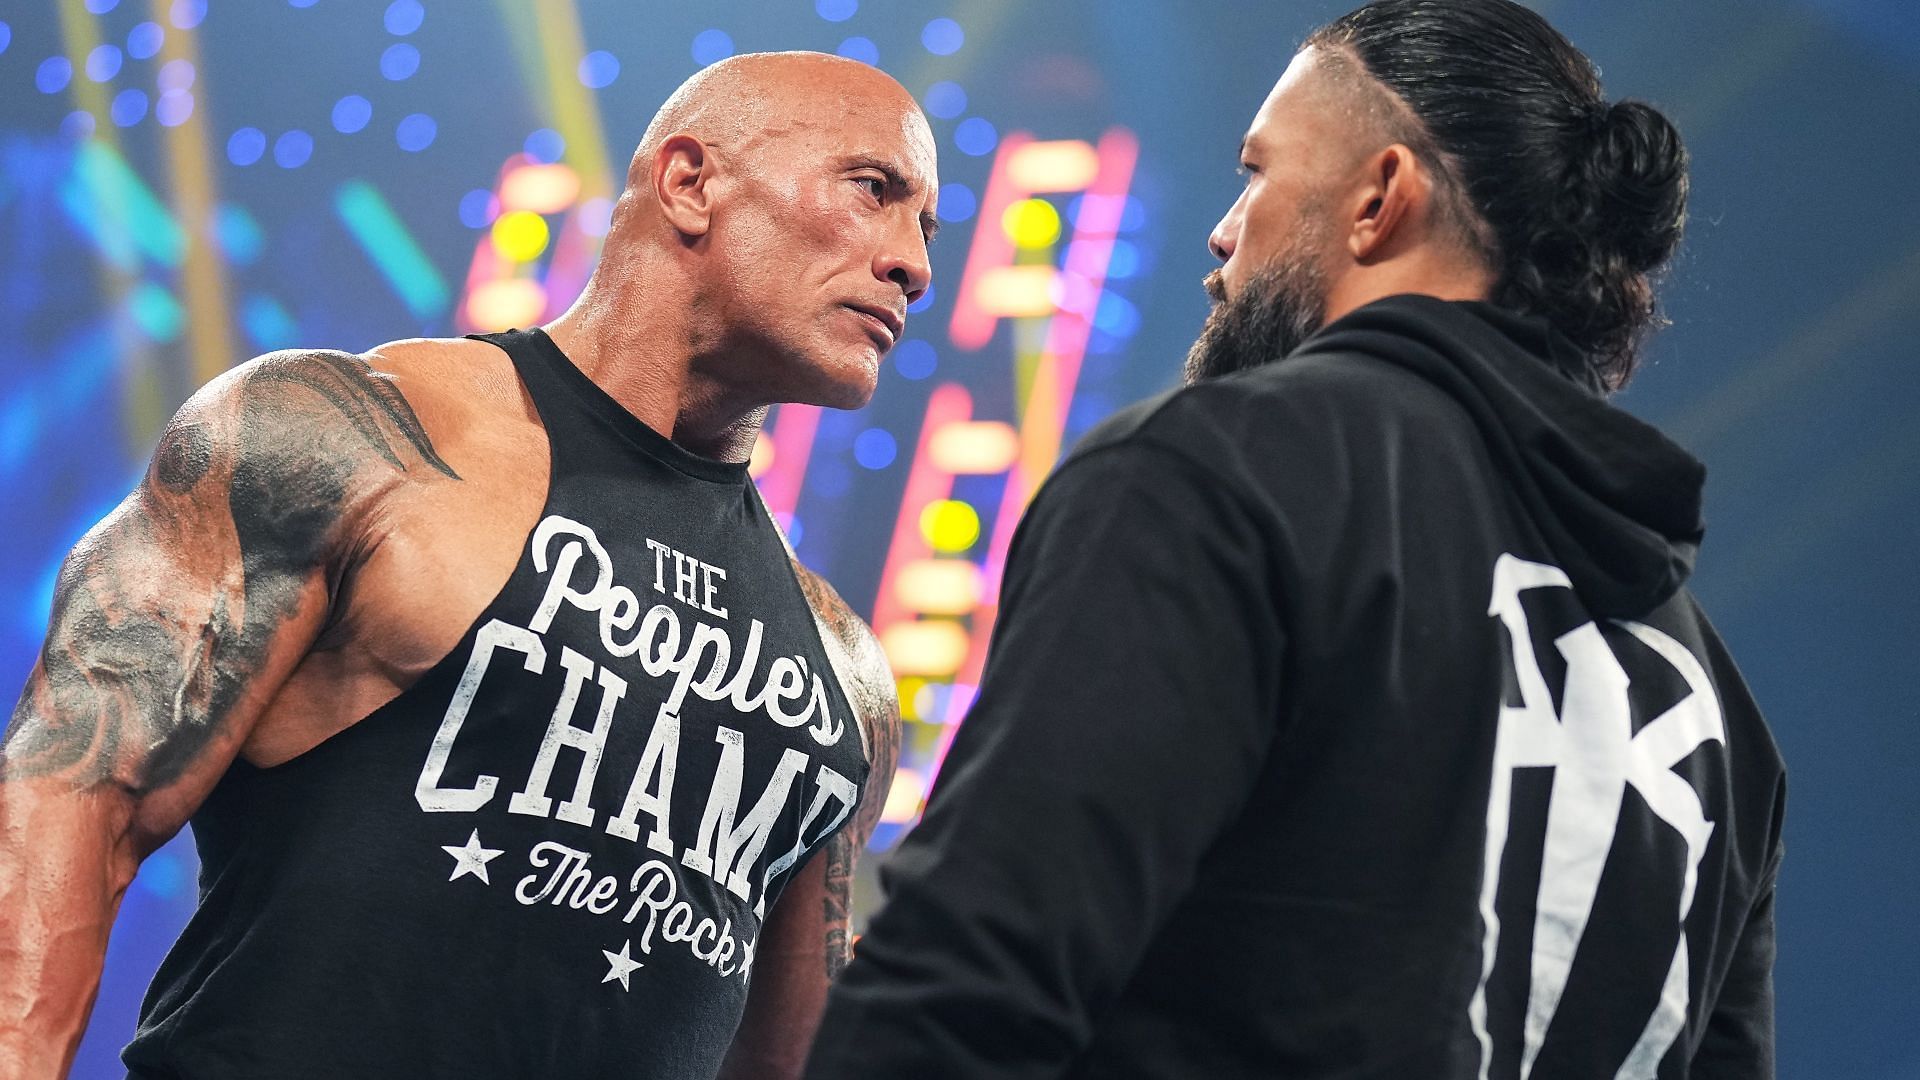 The Rock and Roman Reigns will likely face at WWE WrestleMania XL